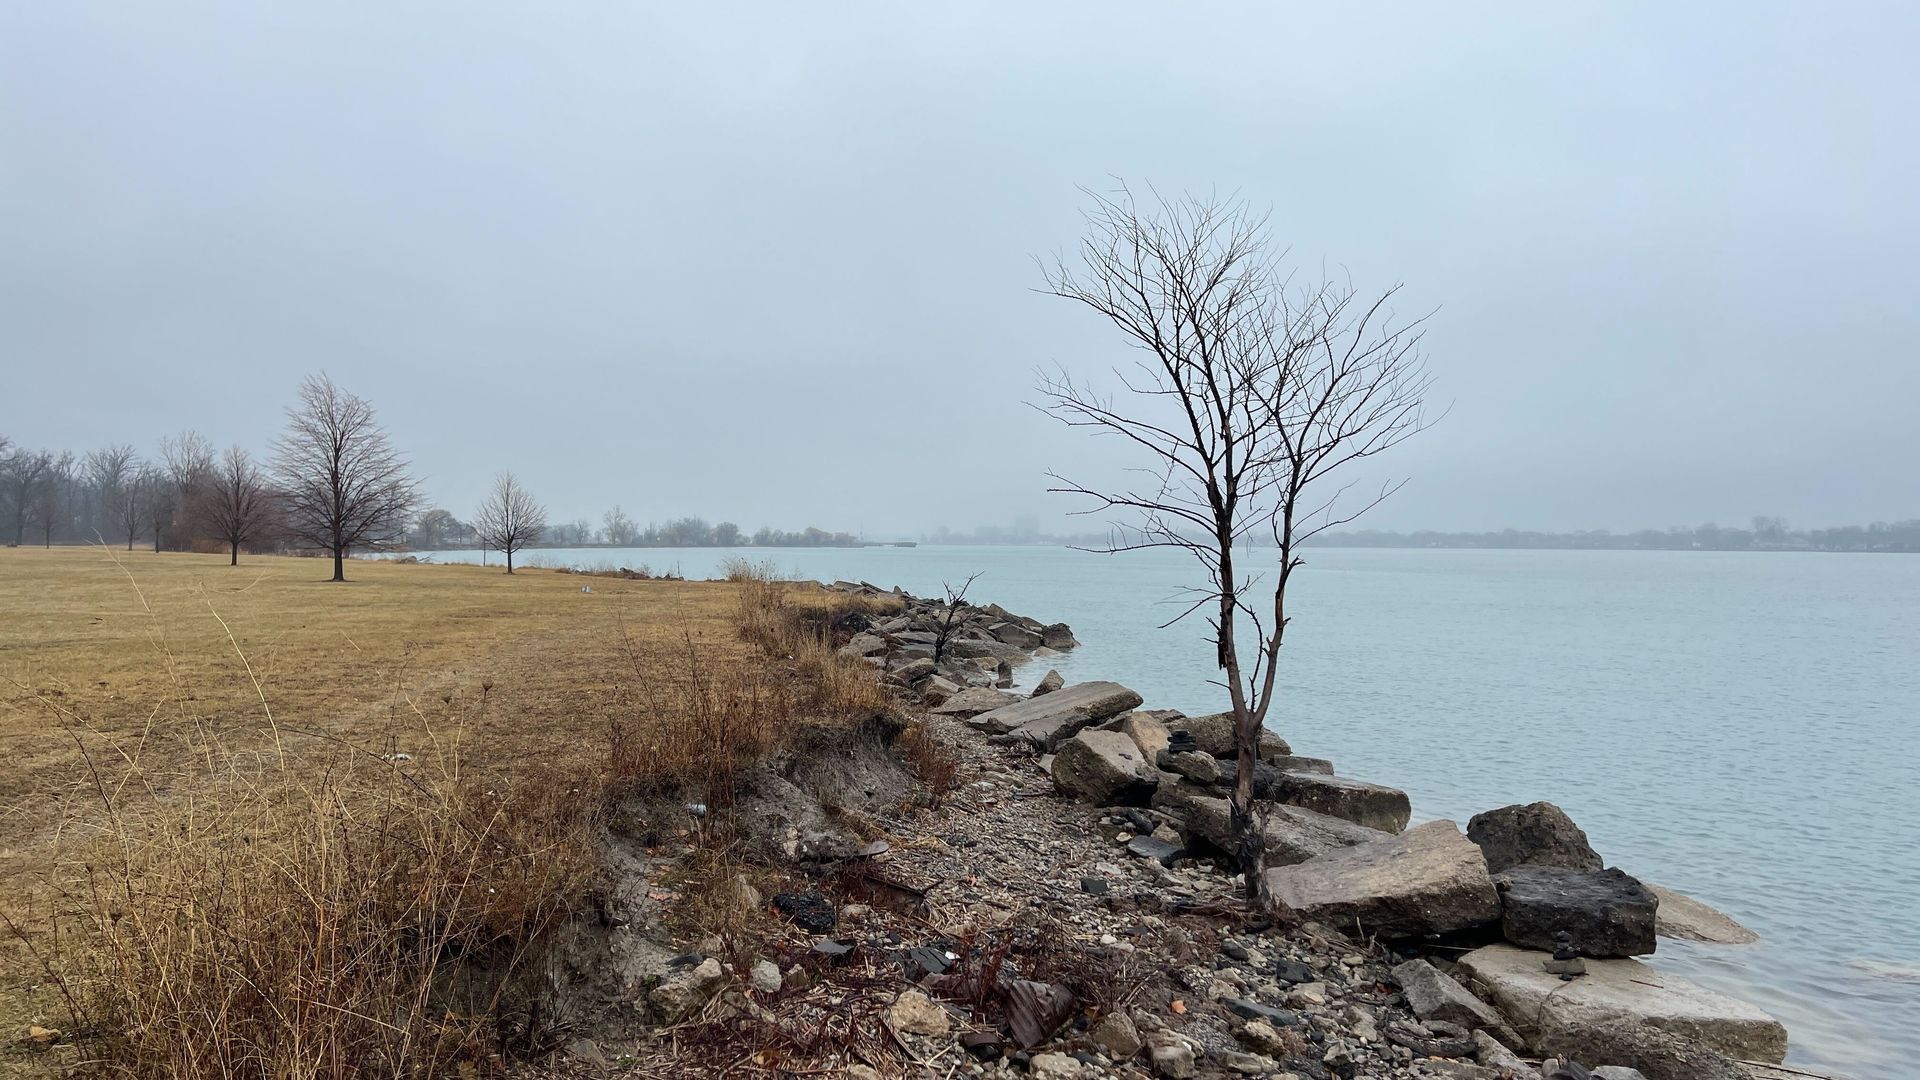 The rocky shore along the south side of Belle Isle